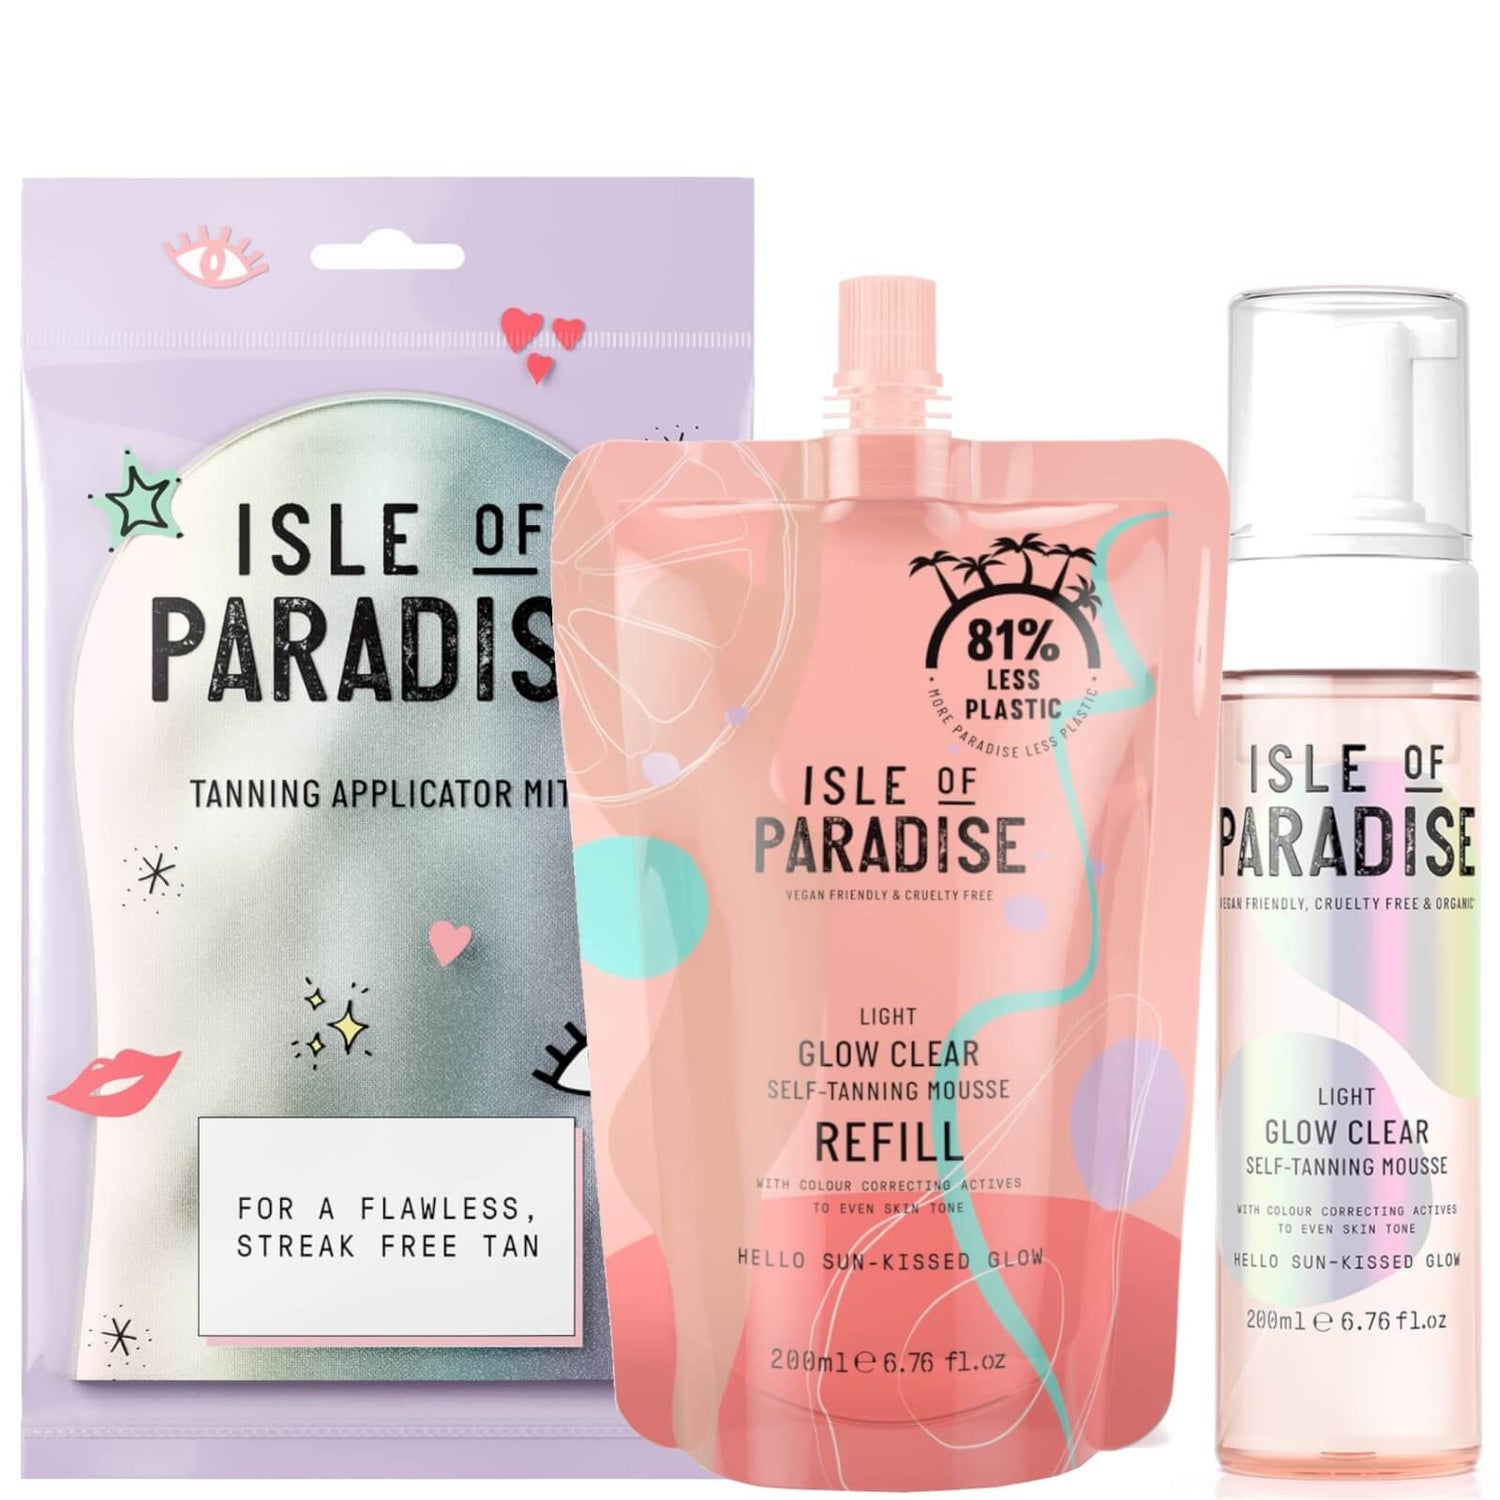 Isle of Paradise Light Glow Clear Mousse and Refill and Mitt Bundle